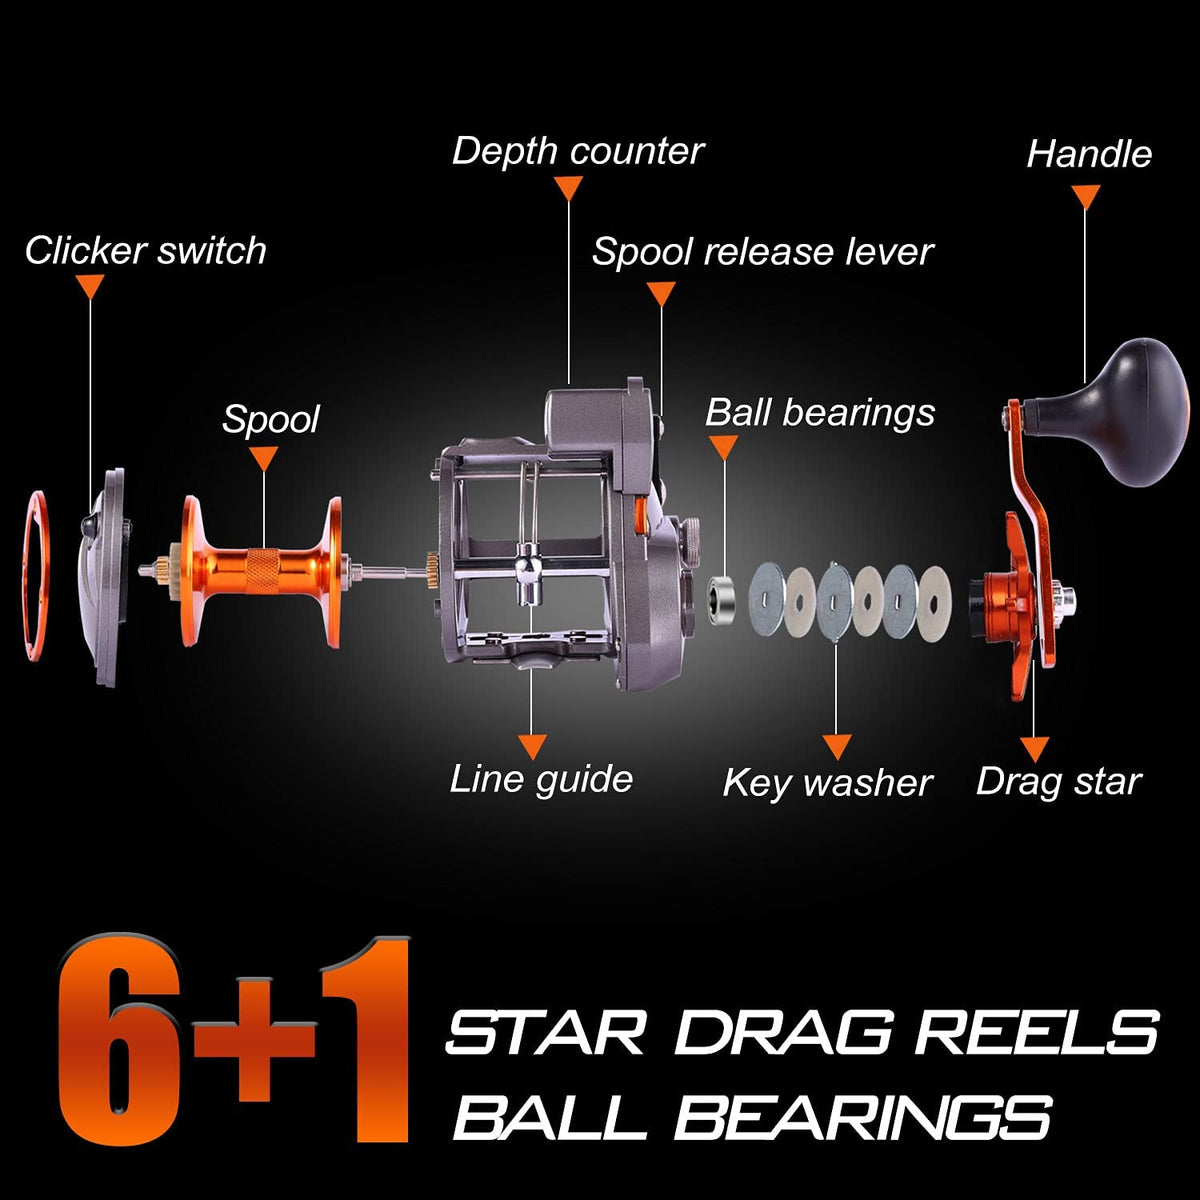 Trolling Reel, Level Wind Fishing Reel, Conventional Reel for